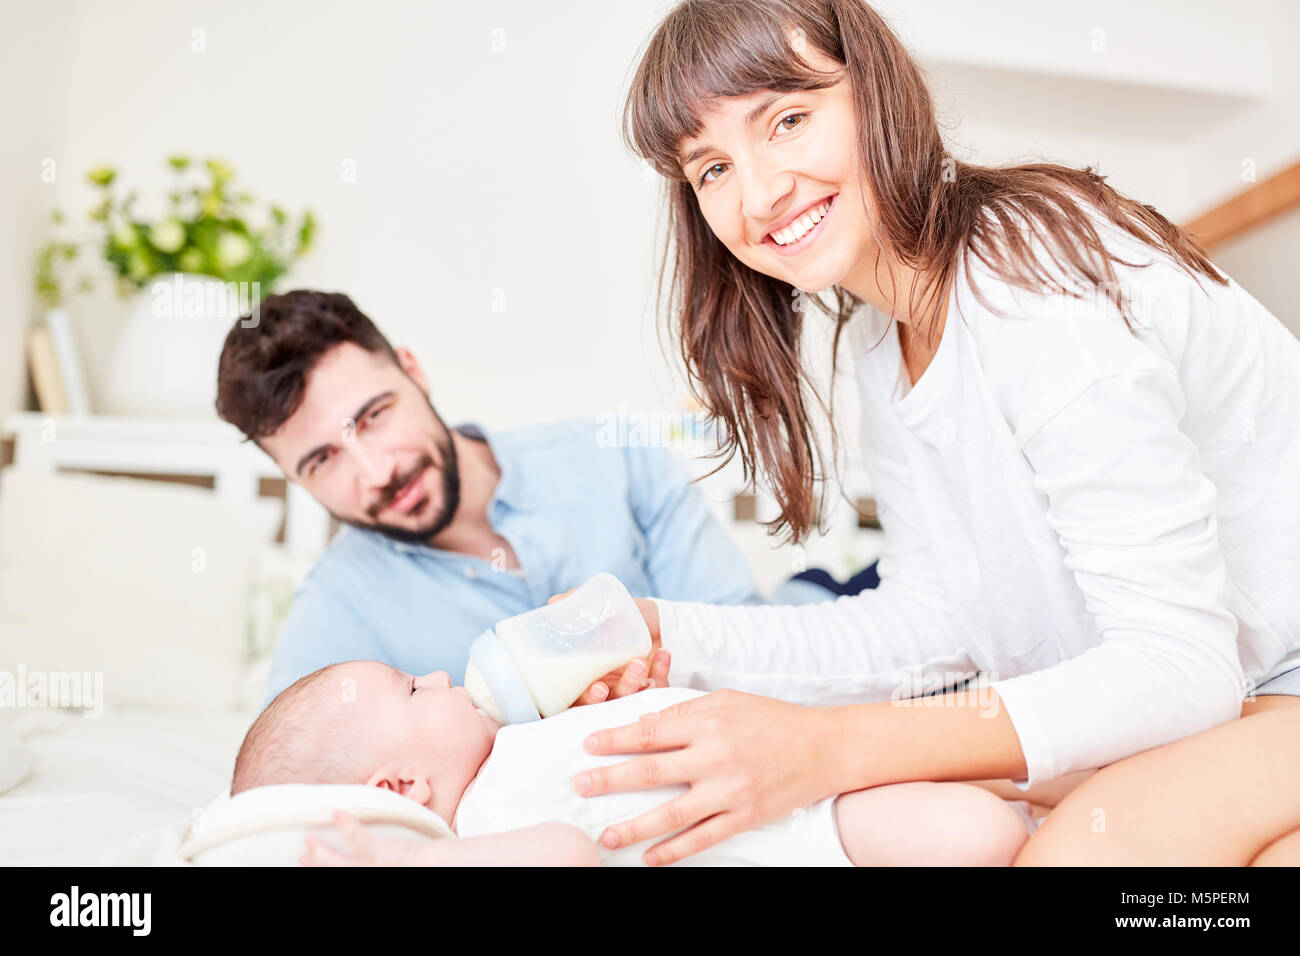 Mother and father as parents give the bottle of baby milk to their baby Stock Photo